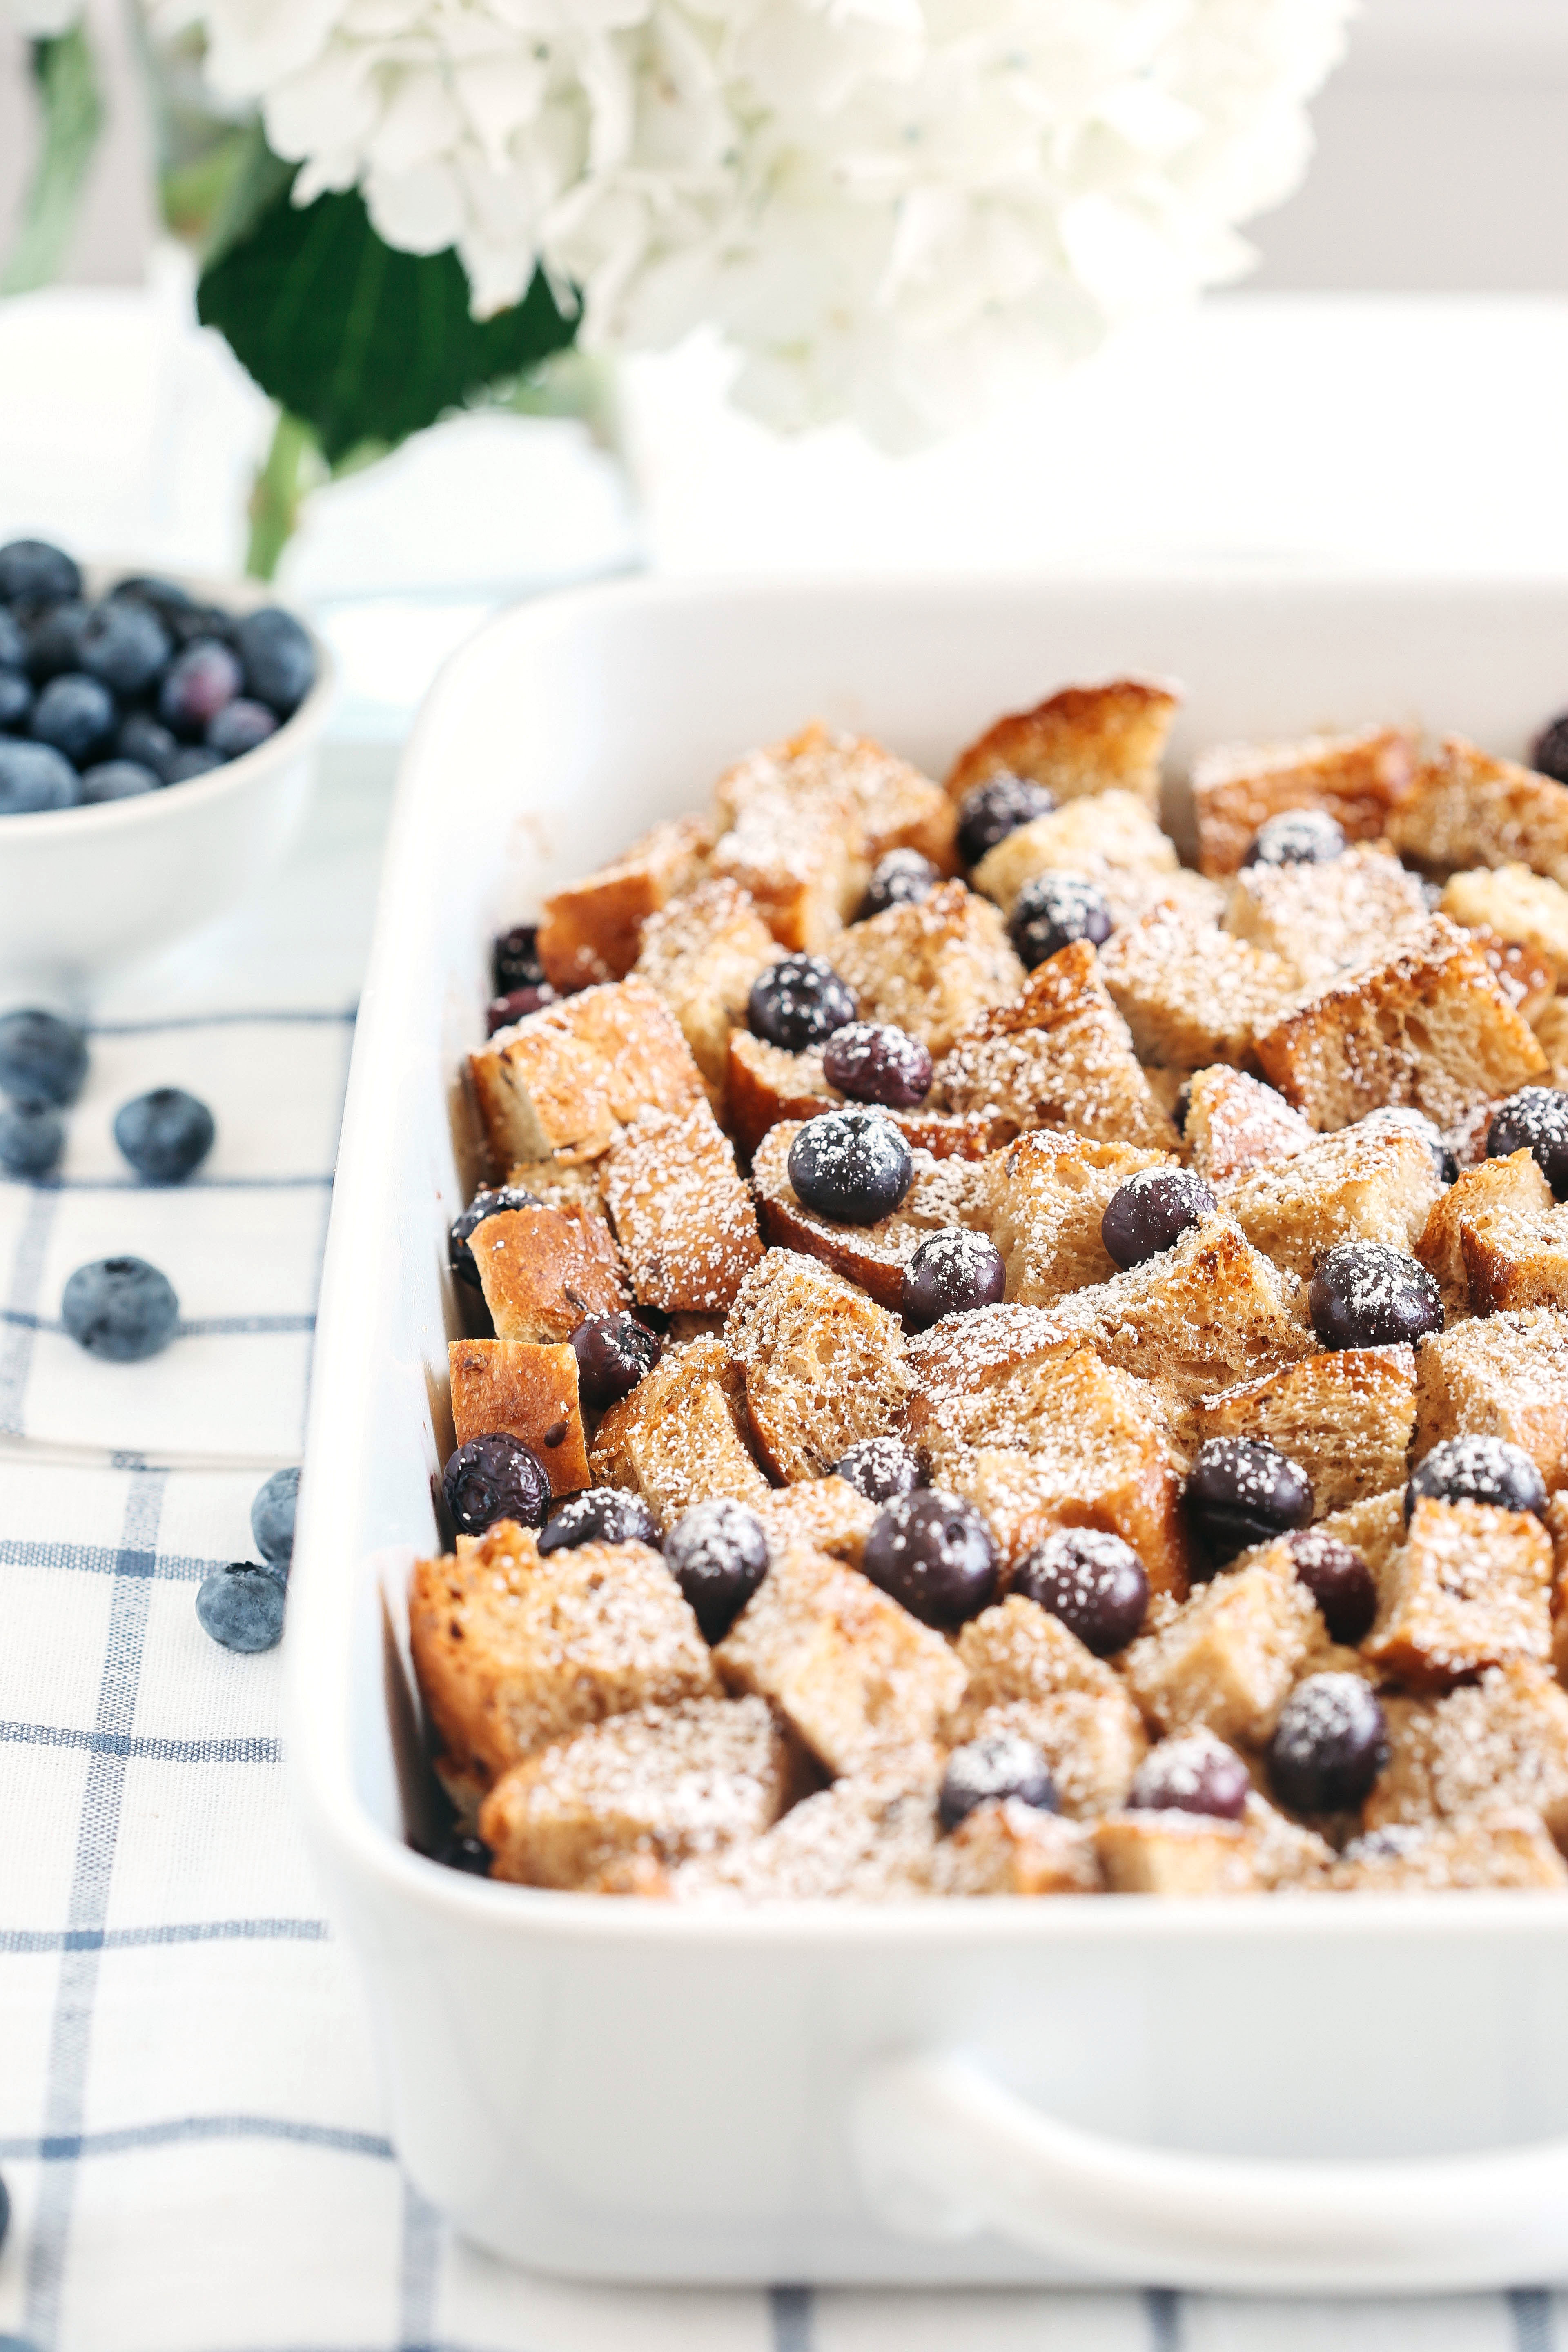 Warm and delicious Overnight Blueberry French Toast Casserole that is lighter in calories, high in protein and can easily be made the night before for the perfect morning breakfast!